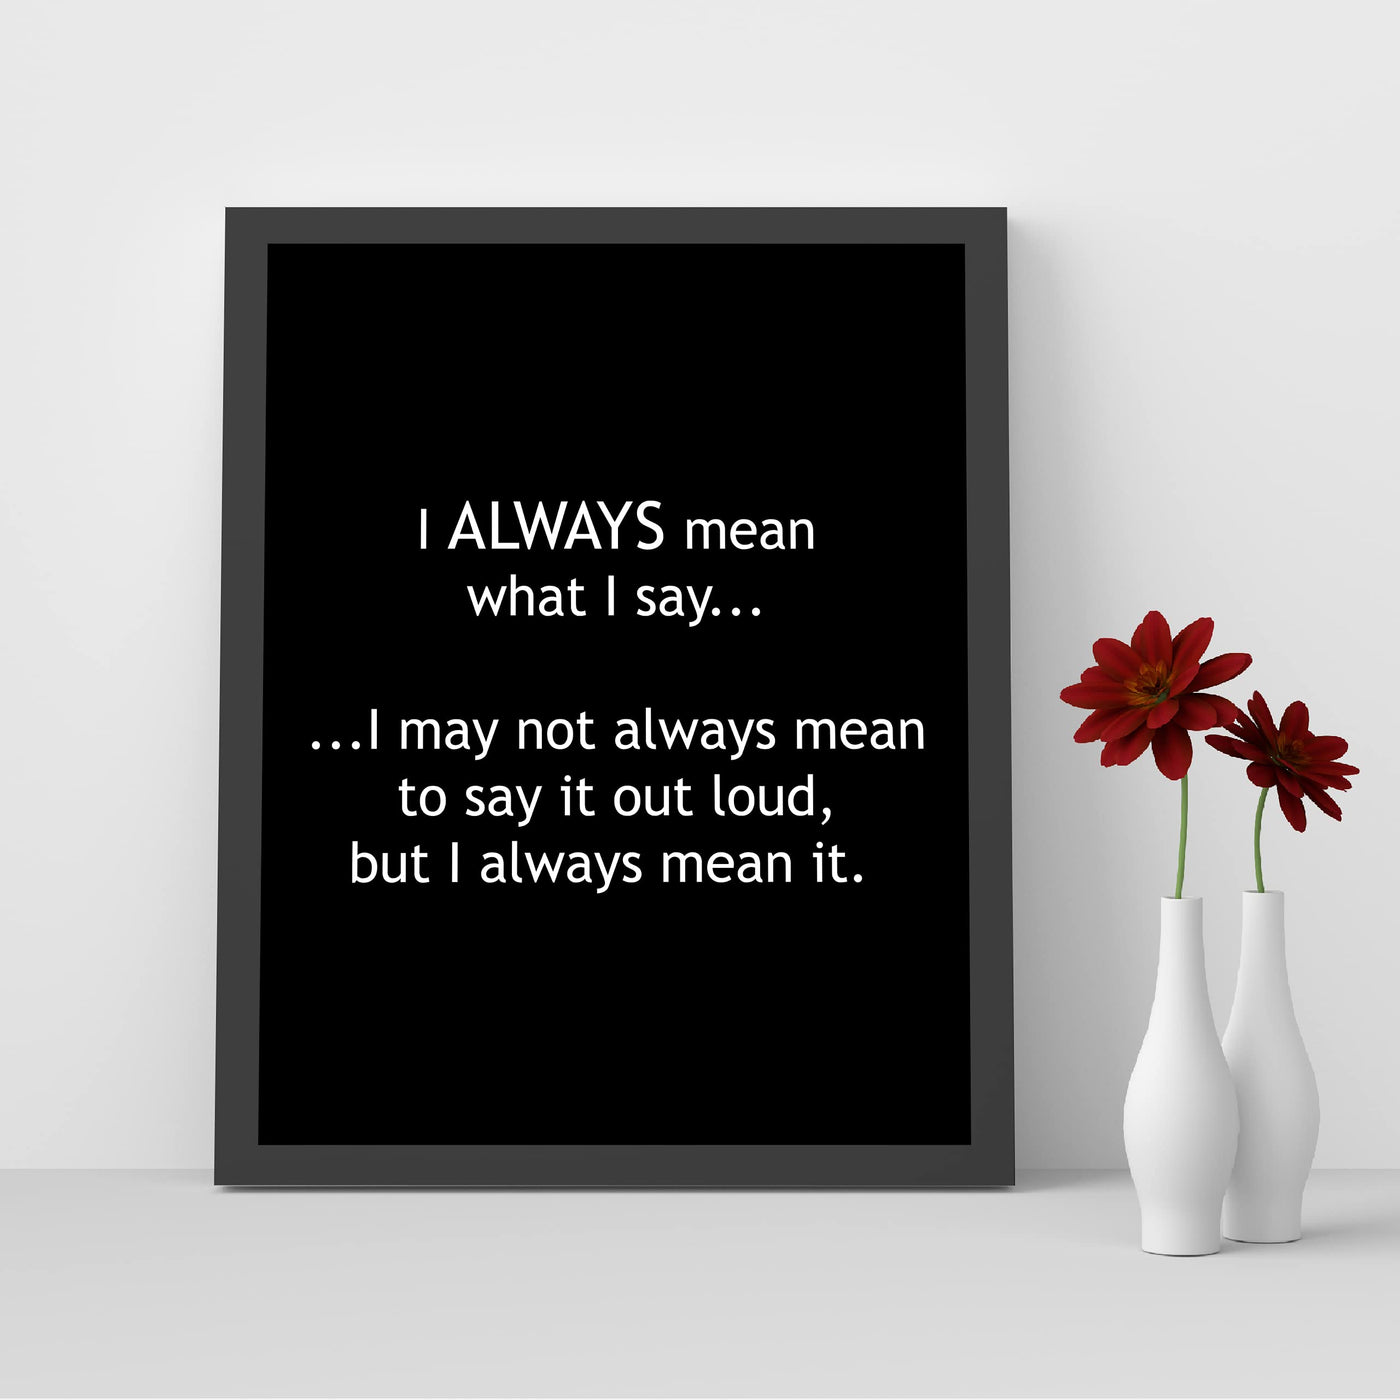 Mean What I Say-May Not Always Mean to Say It Out Loud Funny Wall Sign -8 x 10" Sarcastic Art Print-Ready to Frame. Humorous Home-Office-Bar-Shop-Cave Decor. Great Desk Sign-Fun Novelty Gift!